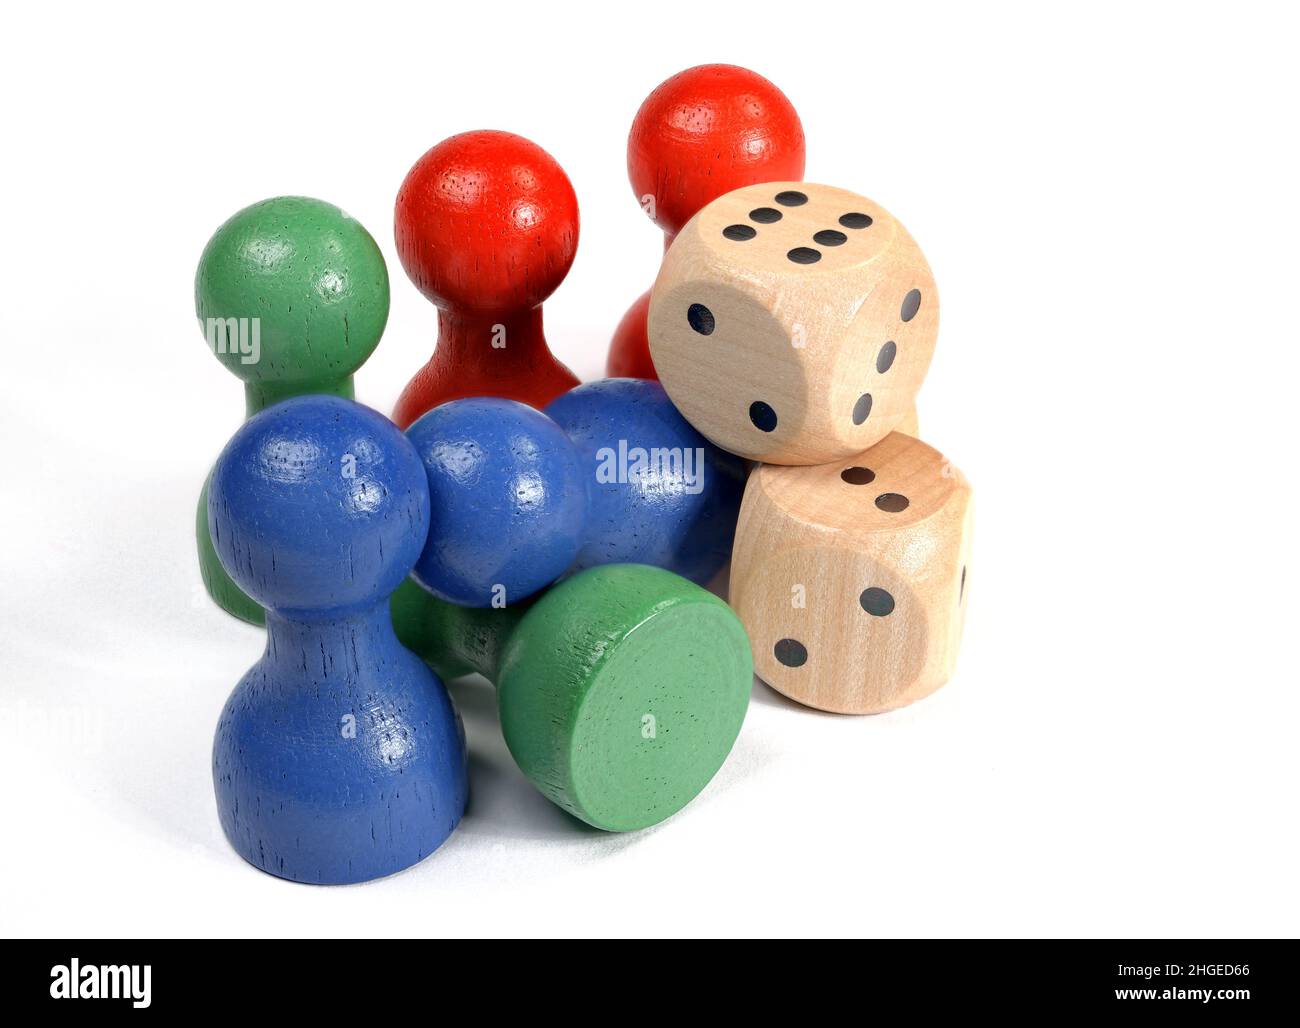 Colorful wooden skittles and dice against white background Stock Photo